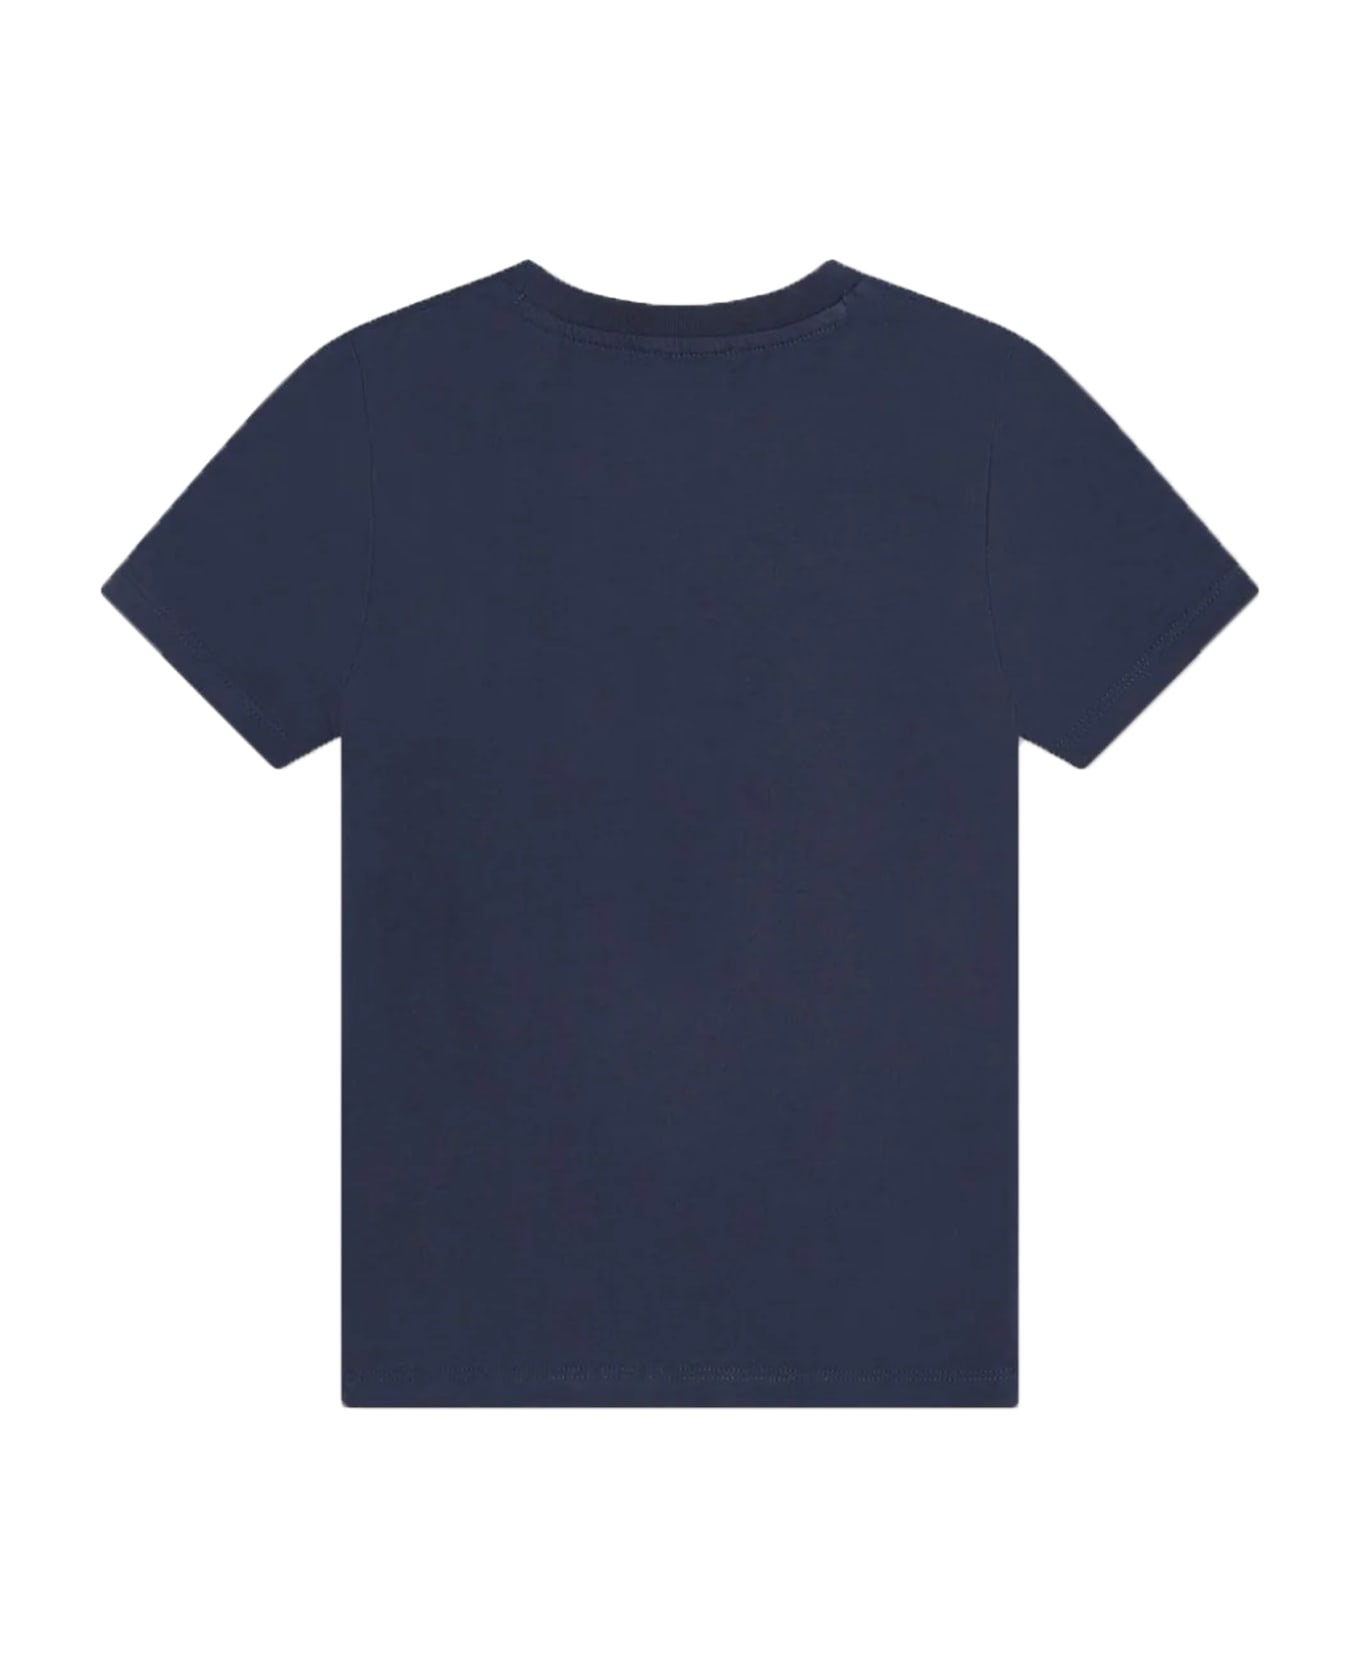 Kenzo T-shirt With Print - Blue